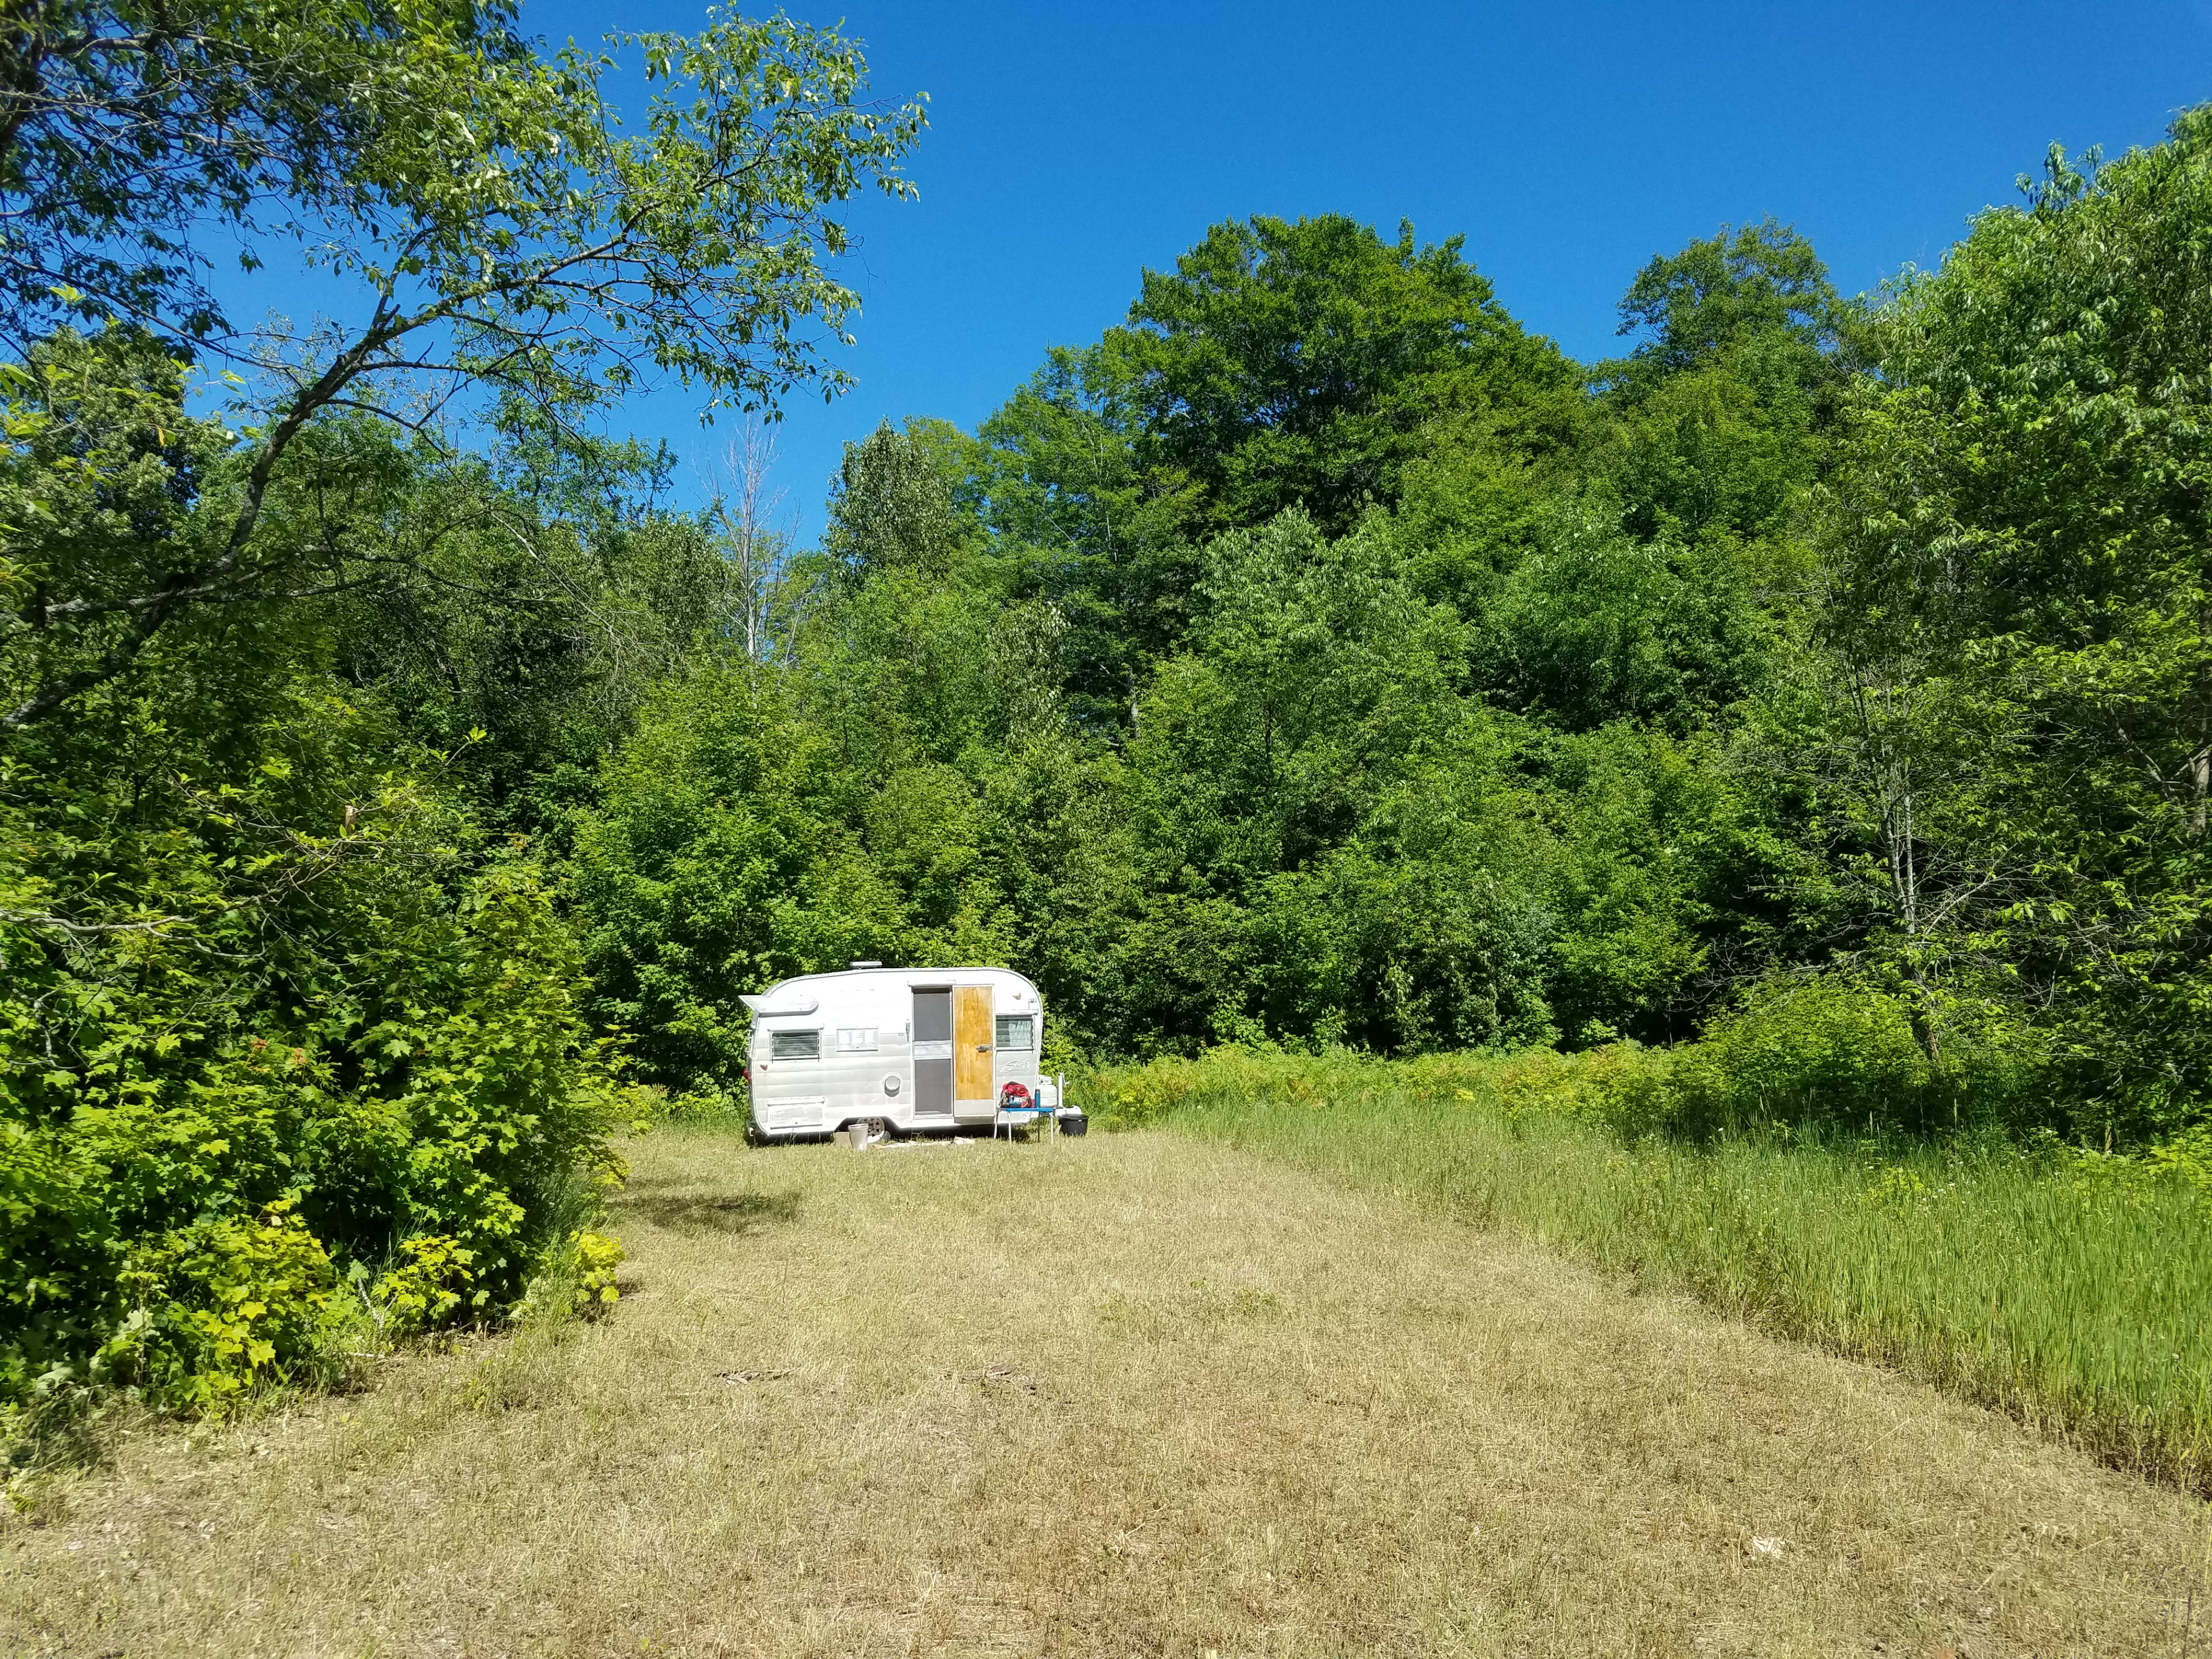 Our camping area. Feel free to peek in windows but the camper is locked so please don't try to enter. Inquire about rentals.